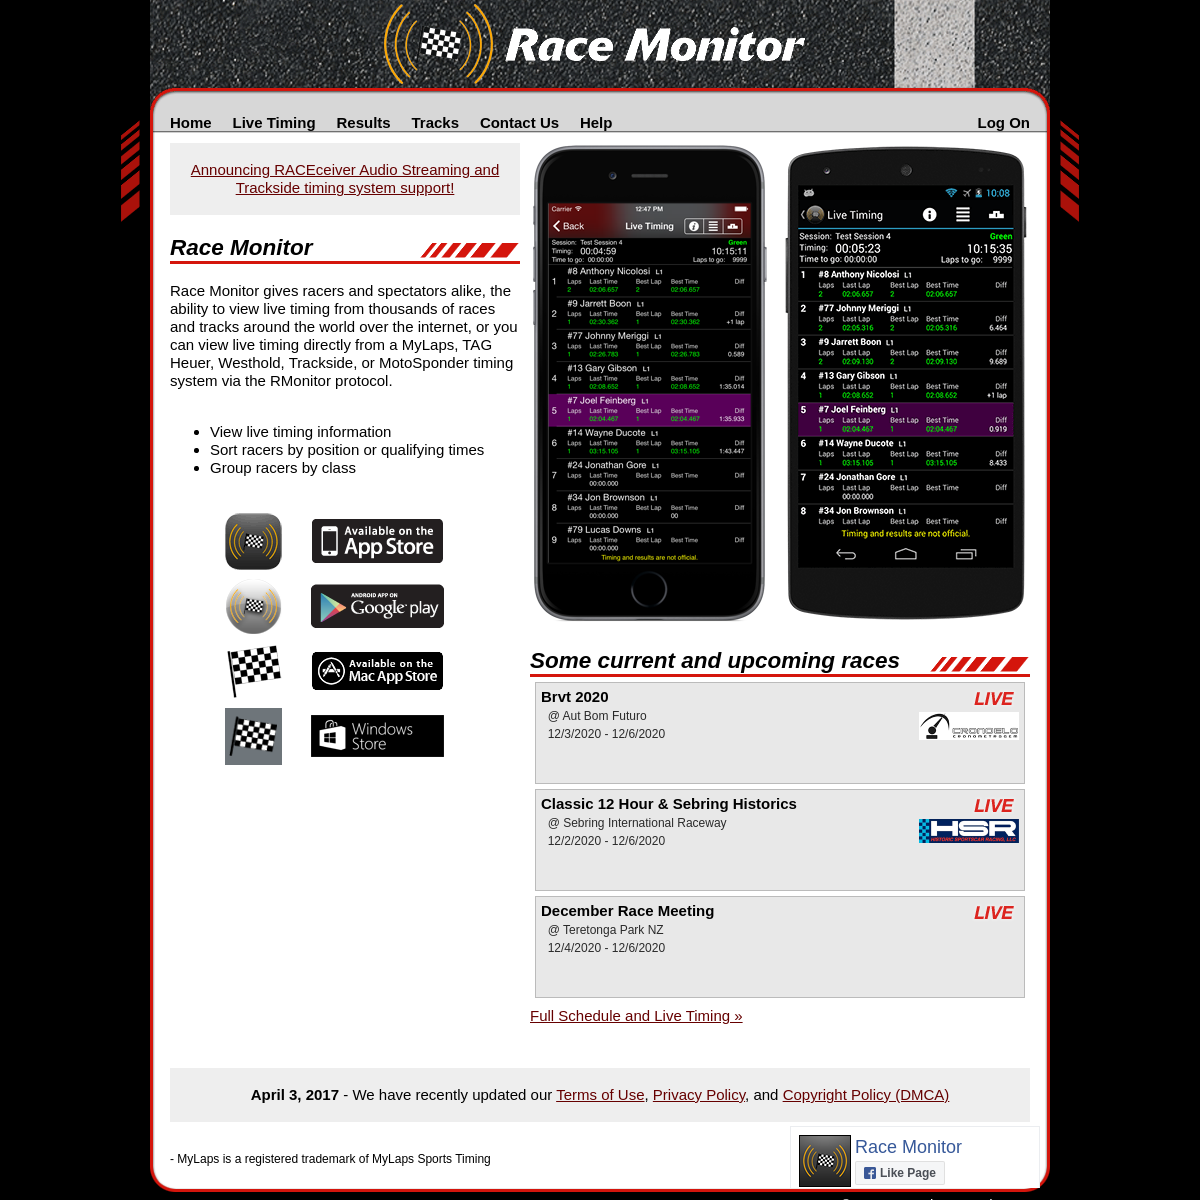 A complete backup of race-monitor.com